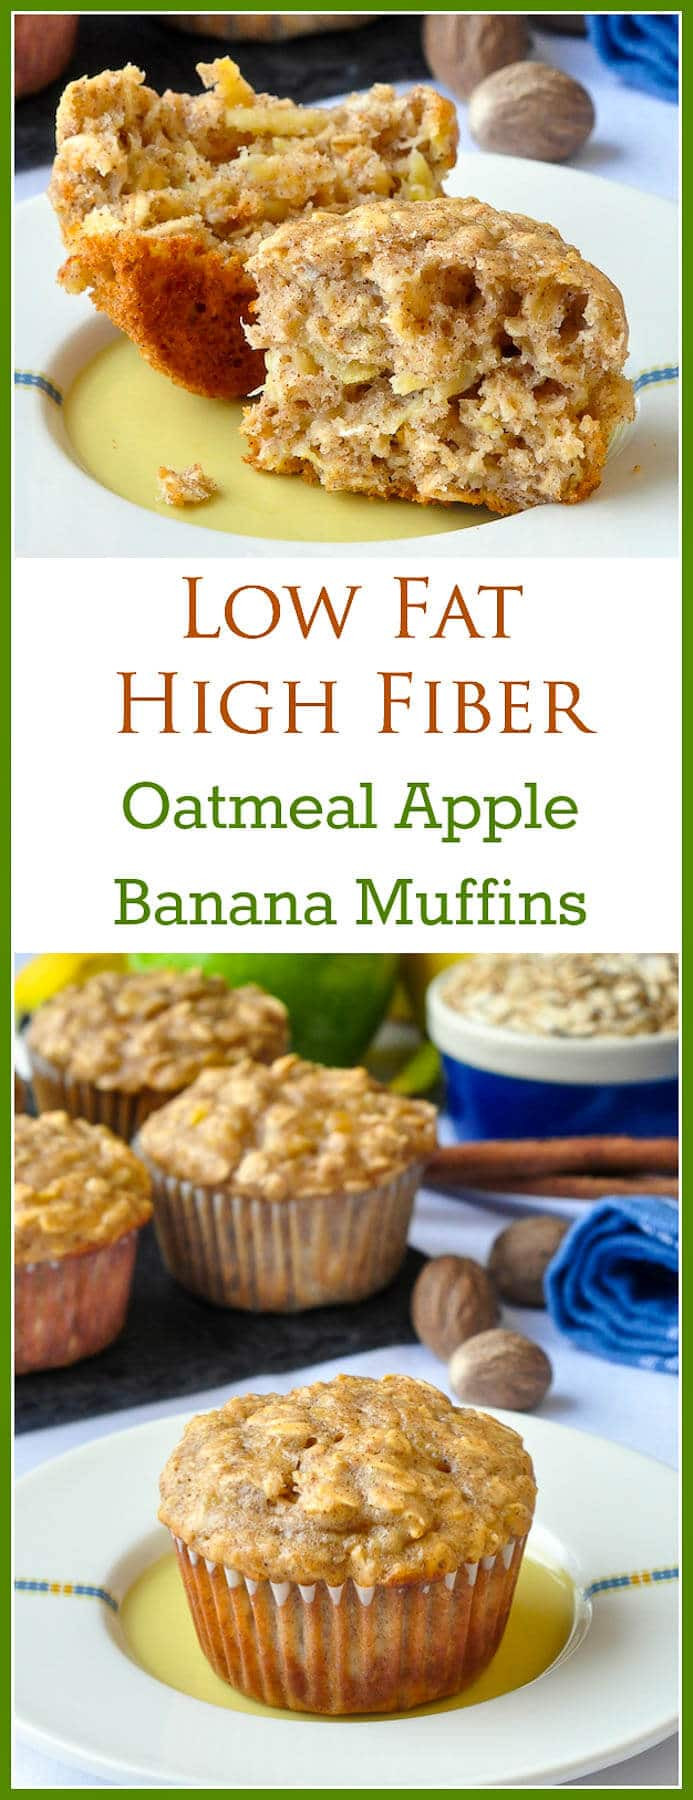 High Fiber Muffin Recipes
 Oatmeal Apple Banana Low Fat Muffins Easy delicious